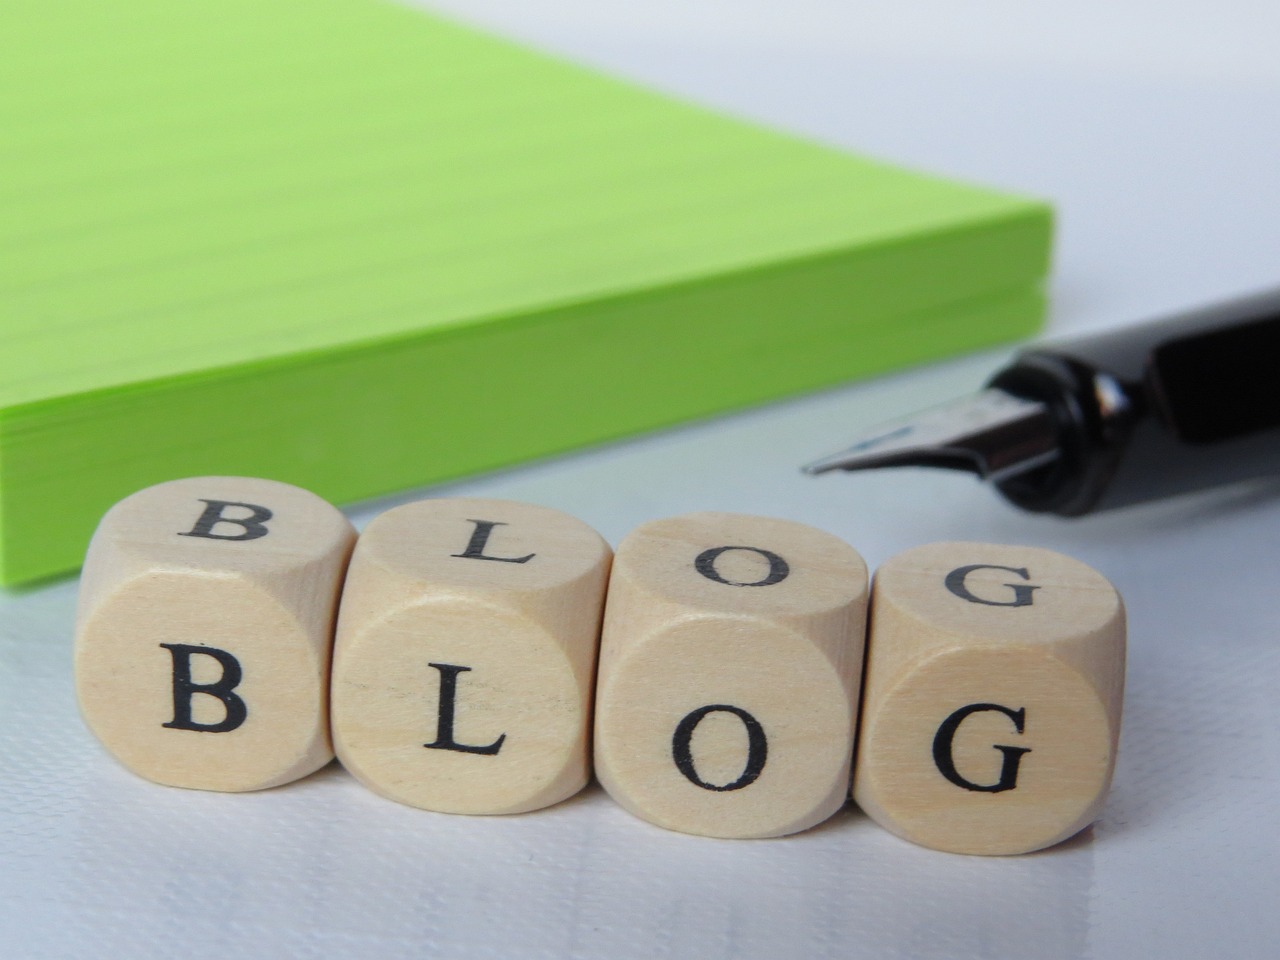 Things successful bloggers have on their blog right bar